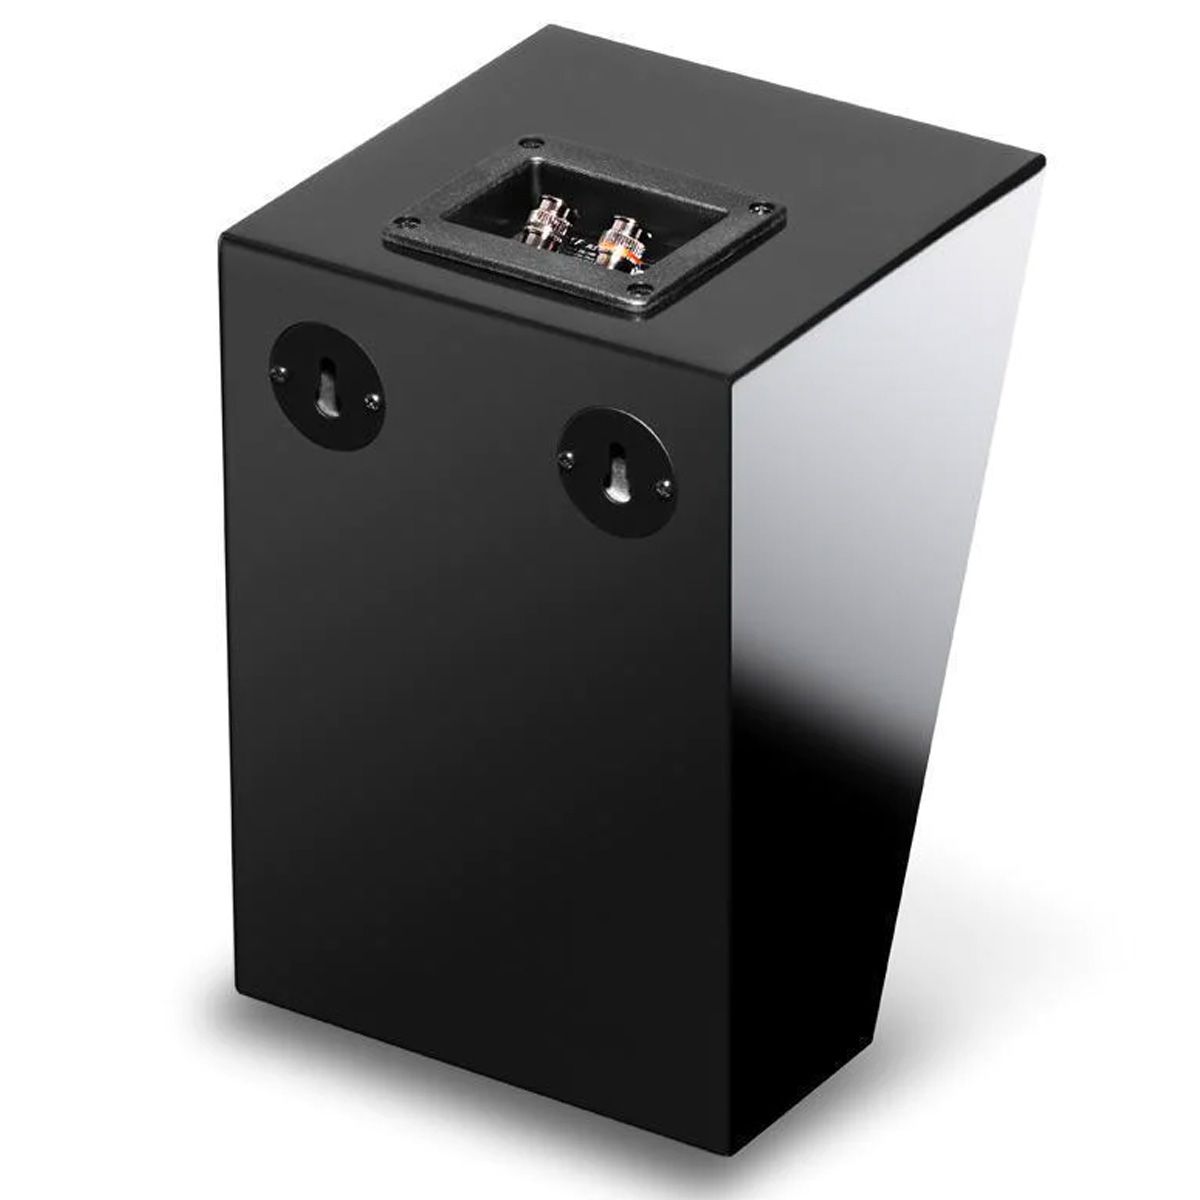 KEF R8a Dolby Atmos Module Surround Speakers - Black - angled rear view